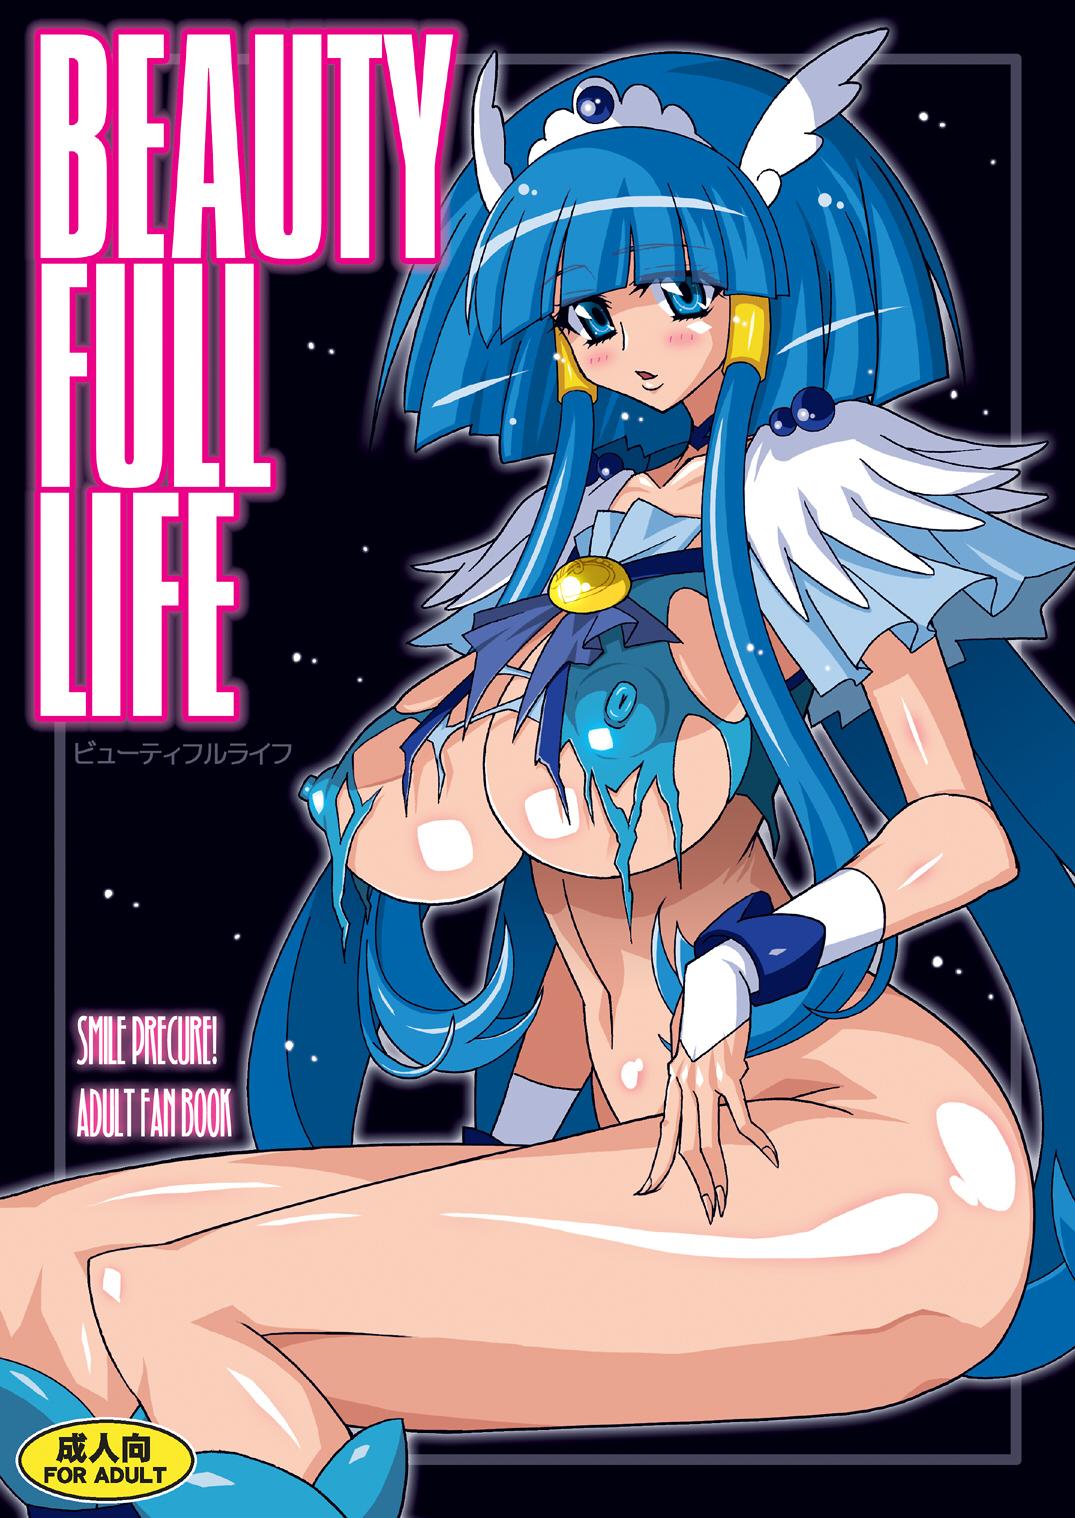 Ink BEAUTY FULL LIFE DL - Smile precure Brasileiro - Page 2